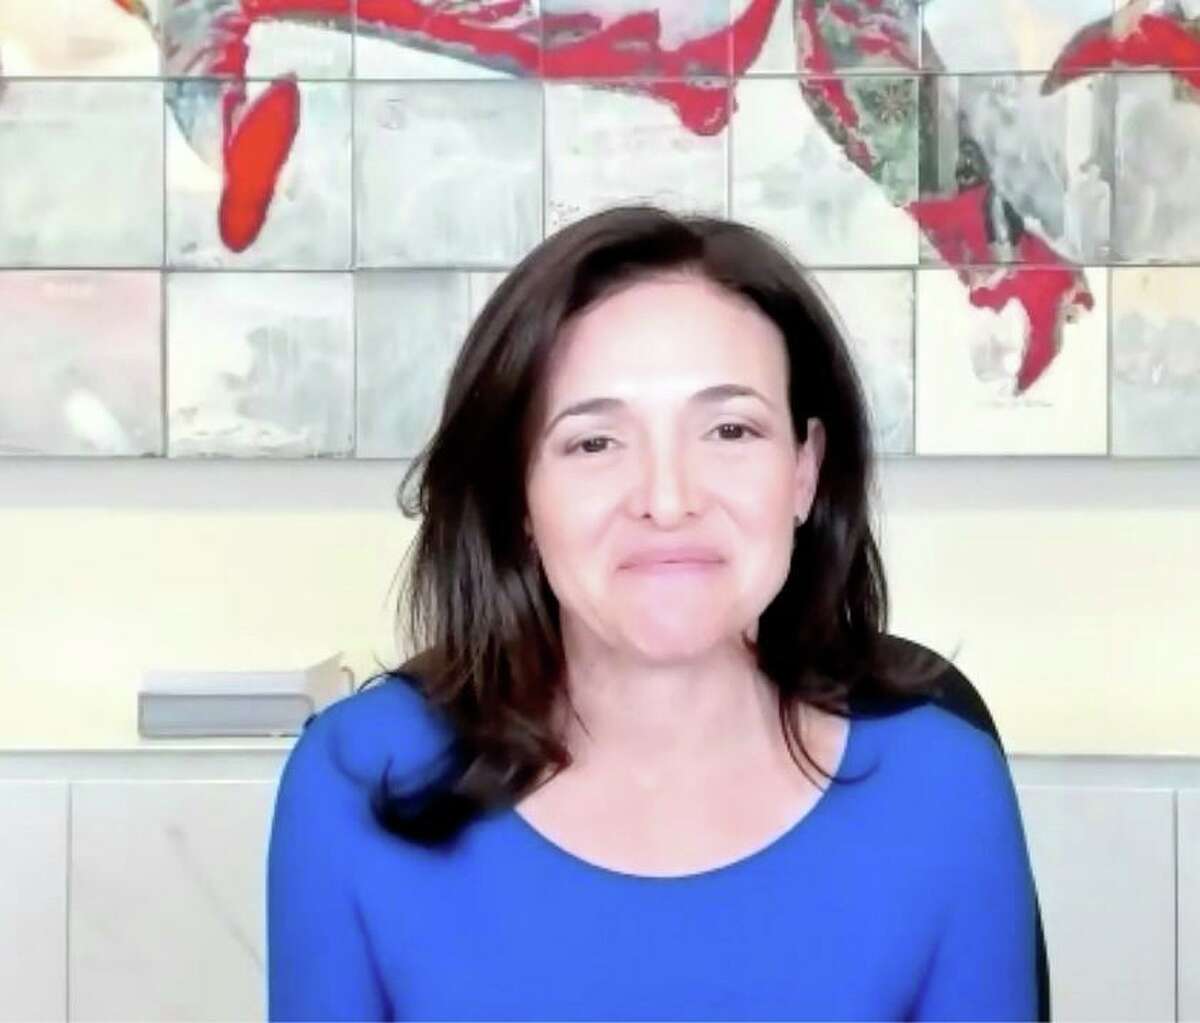 Sheryl Sandberg, chief operating officer at Facebook, talks about Facebook's campaign to spotlight Black-owned small businesses through the month of November.